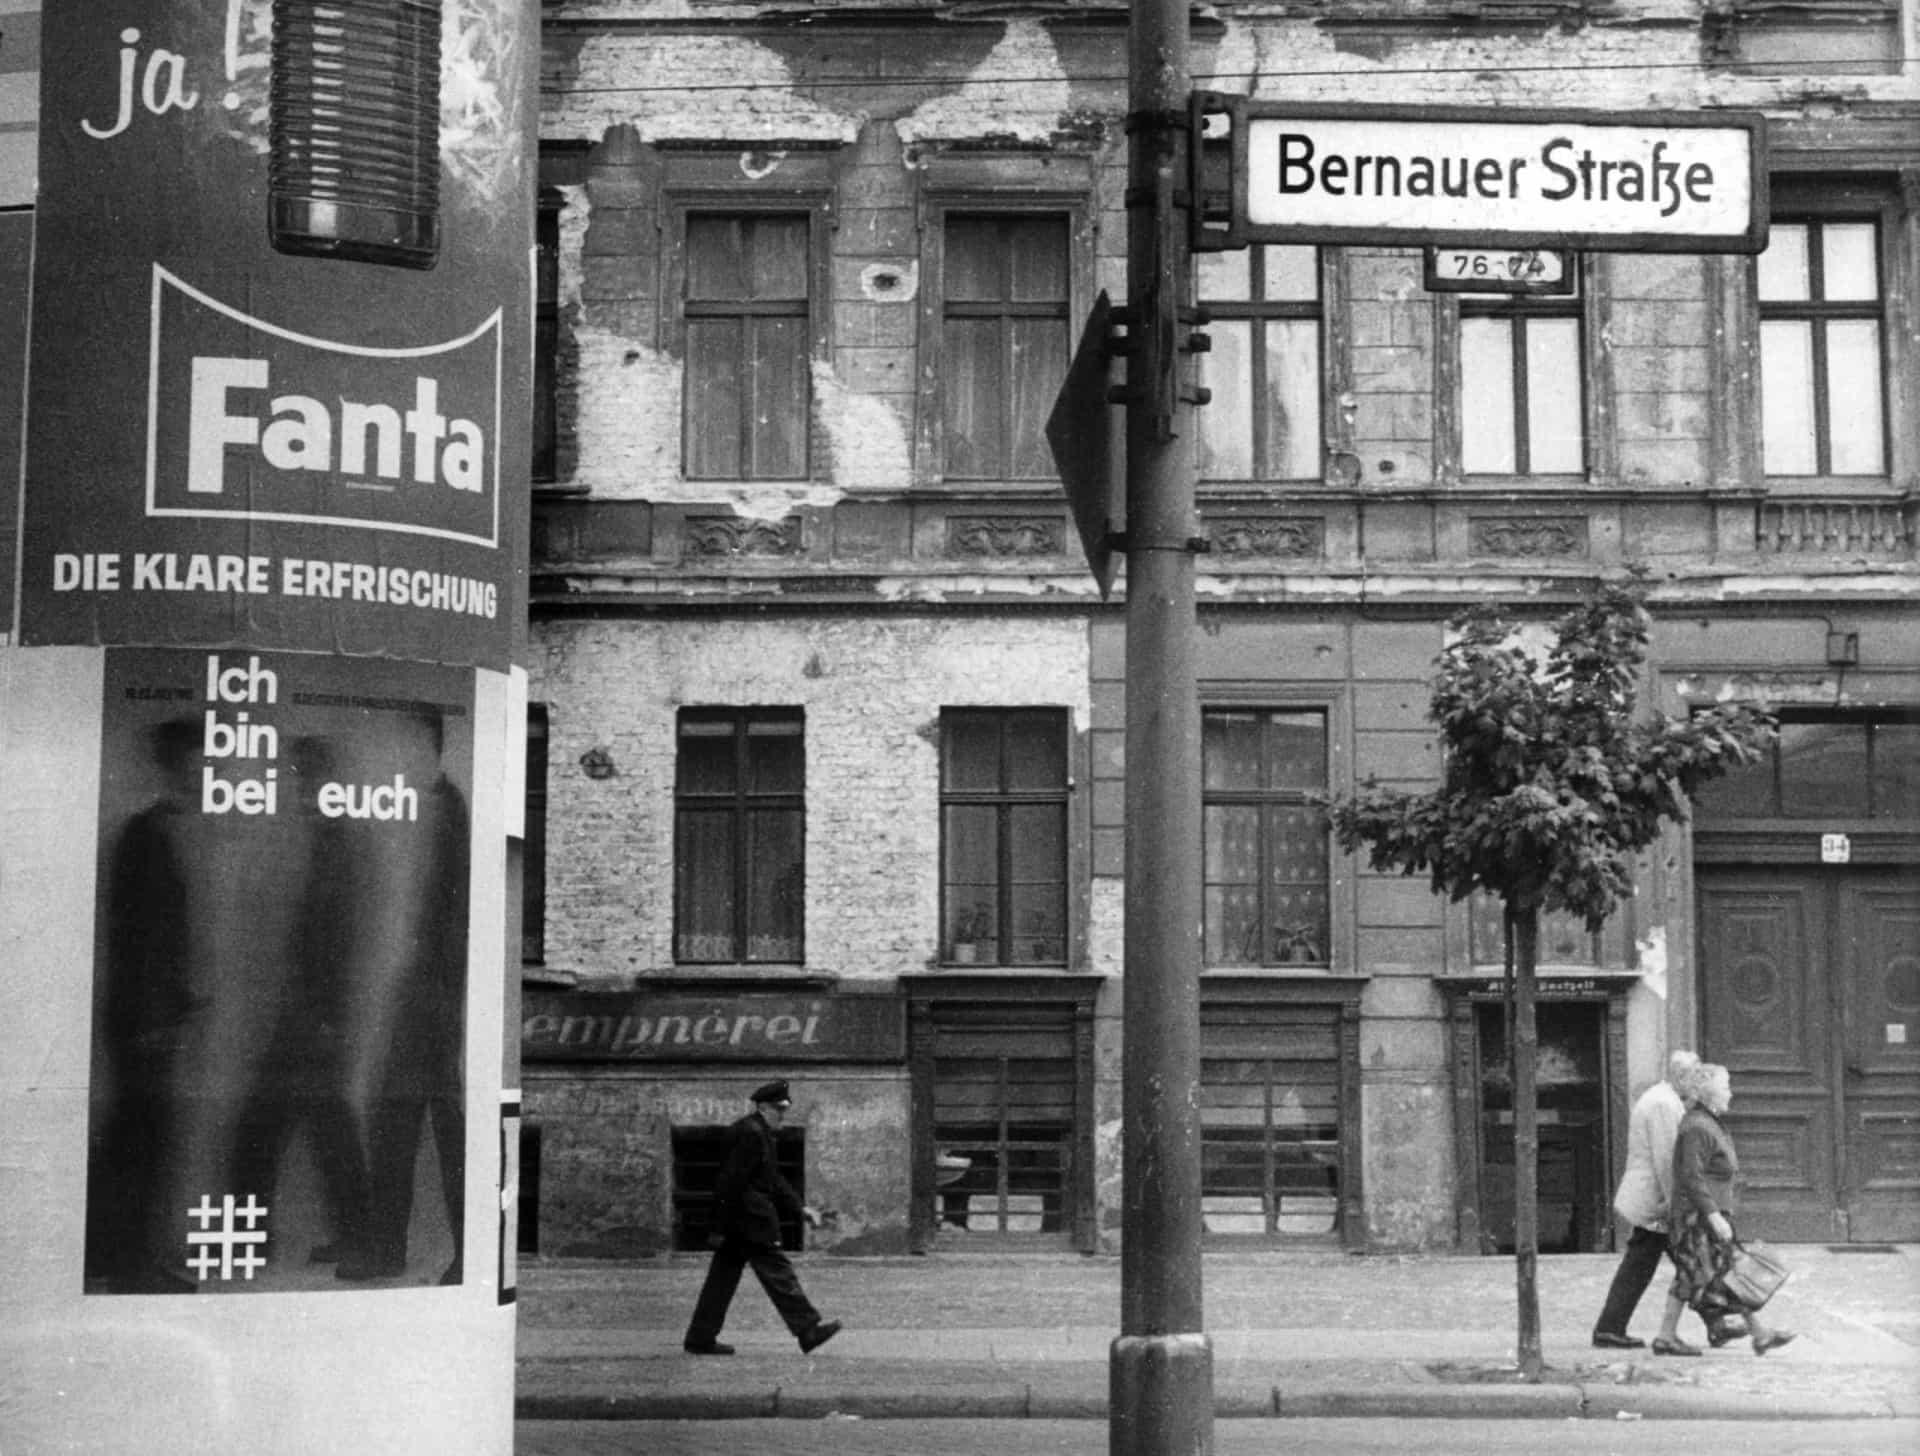 <p>This view across Bernauer Street in West Berlin shows closed shops on July 7, 1961. The buildings opposite are situated in East Berlin.</p><p>You may also like: <a href="https://www.starsinsider.com/n/353915?utm_source=msn.com&utm_medium=display&utm_campaign=referral_description&utm_content=509600en-us">The most devastating earthquakes of all time</a></p>